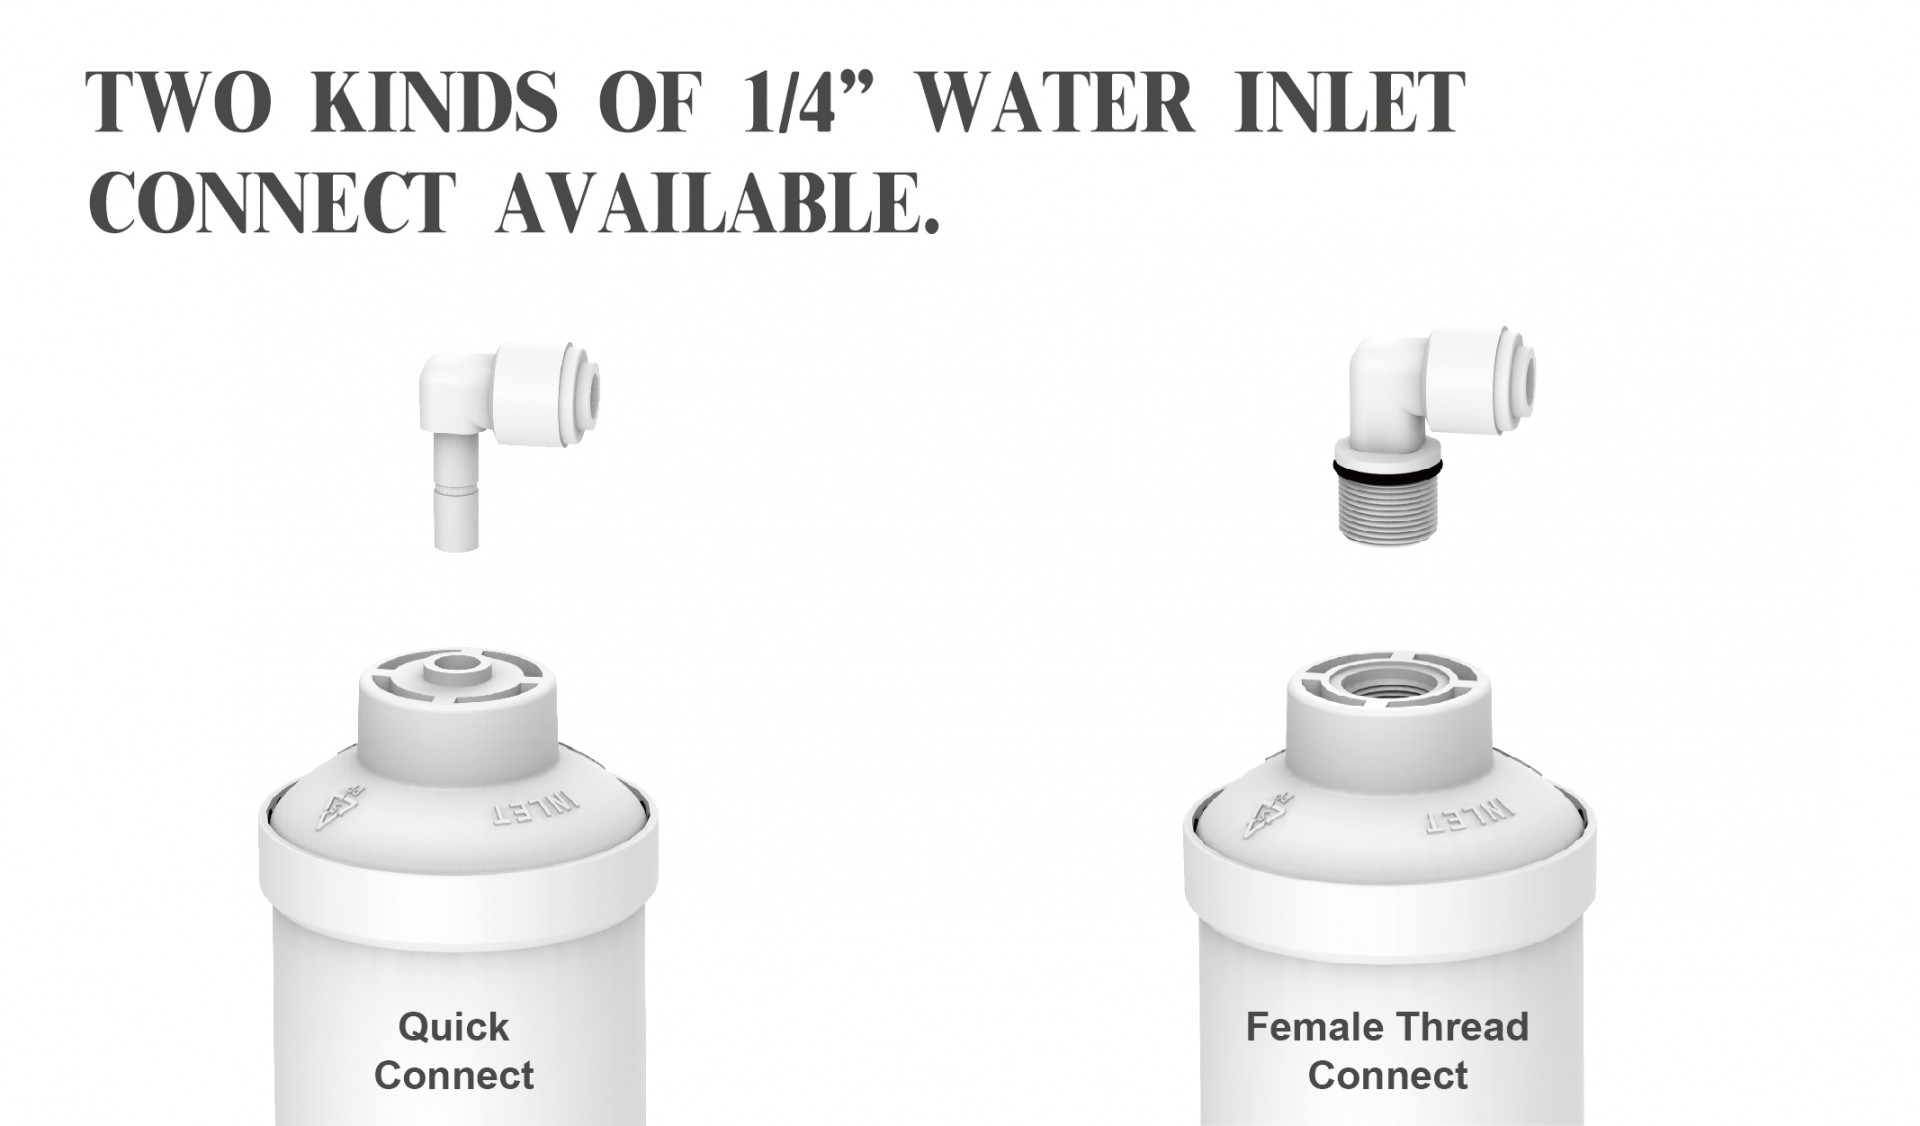 FILTER TWO KINDS OF 1/4 WATER INLET CONNECT AVAILABLE